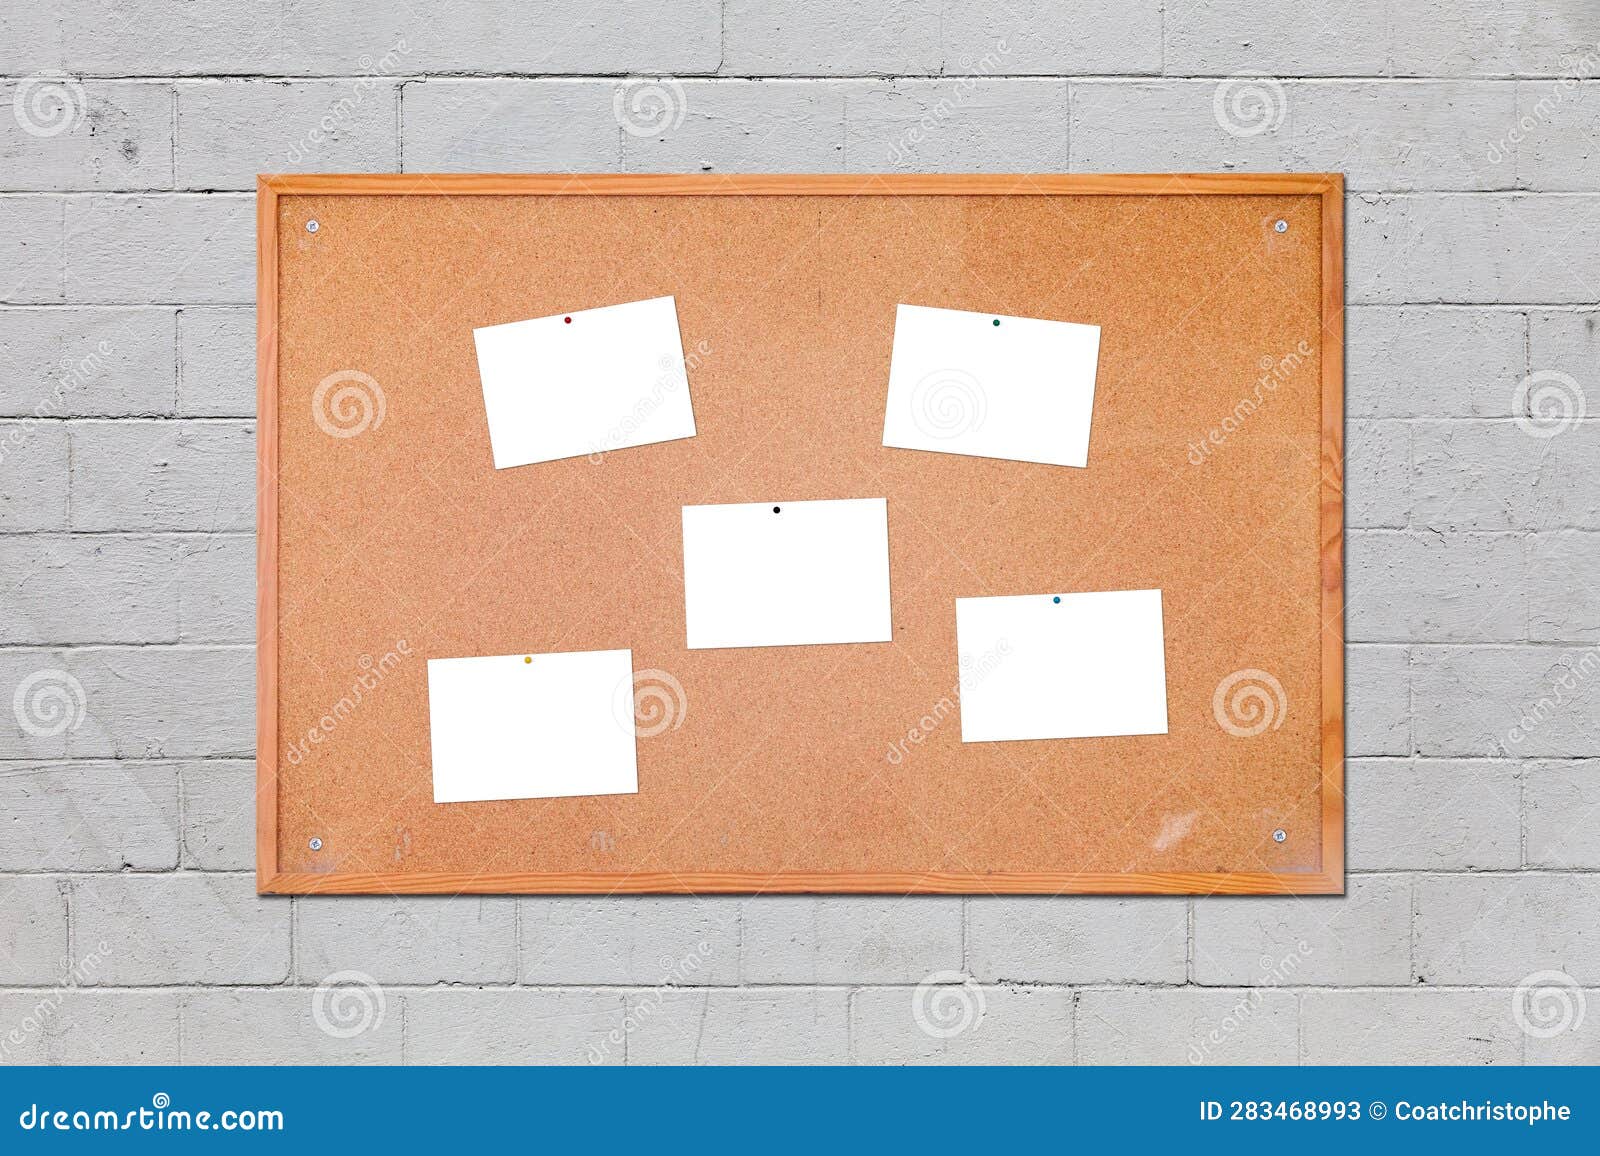 cork board with five card pined on it